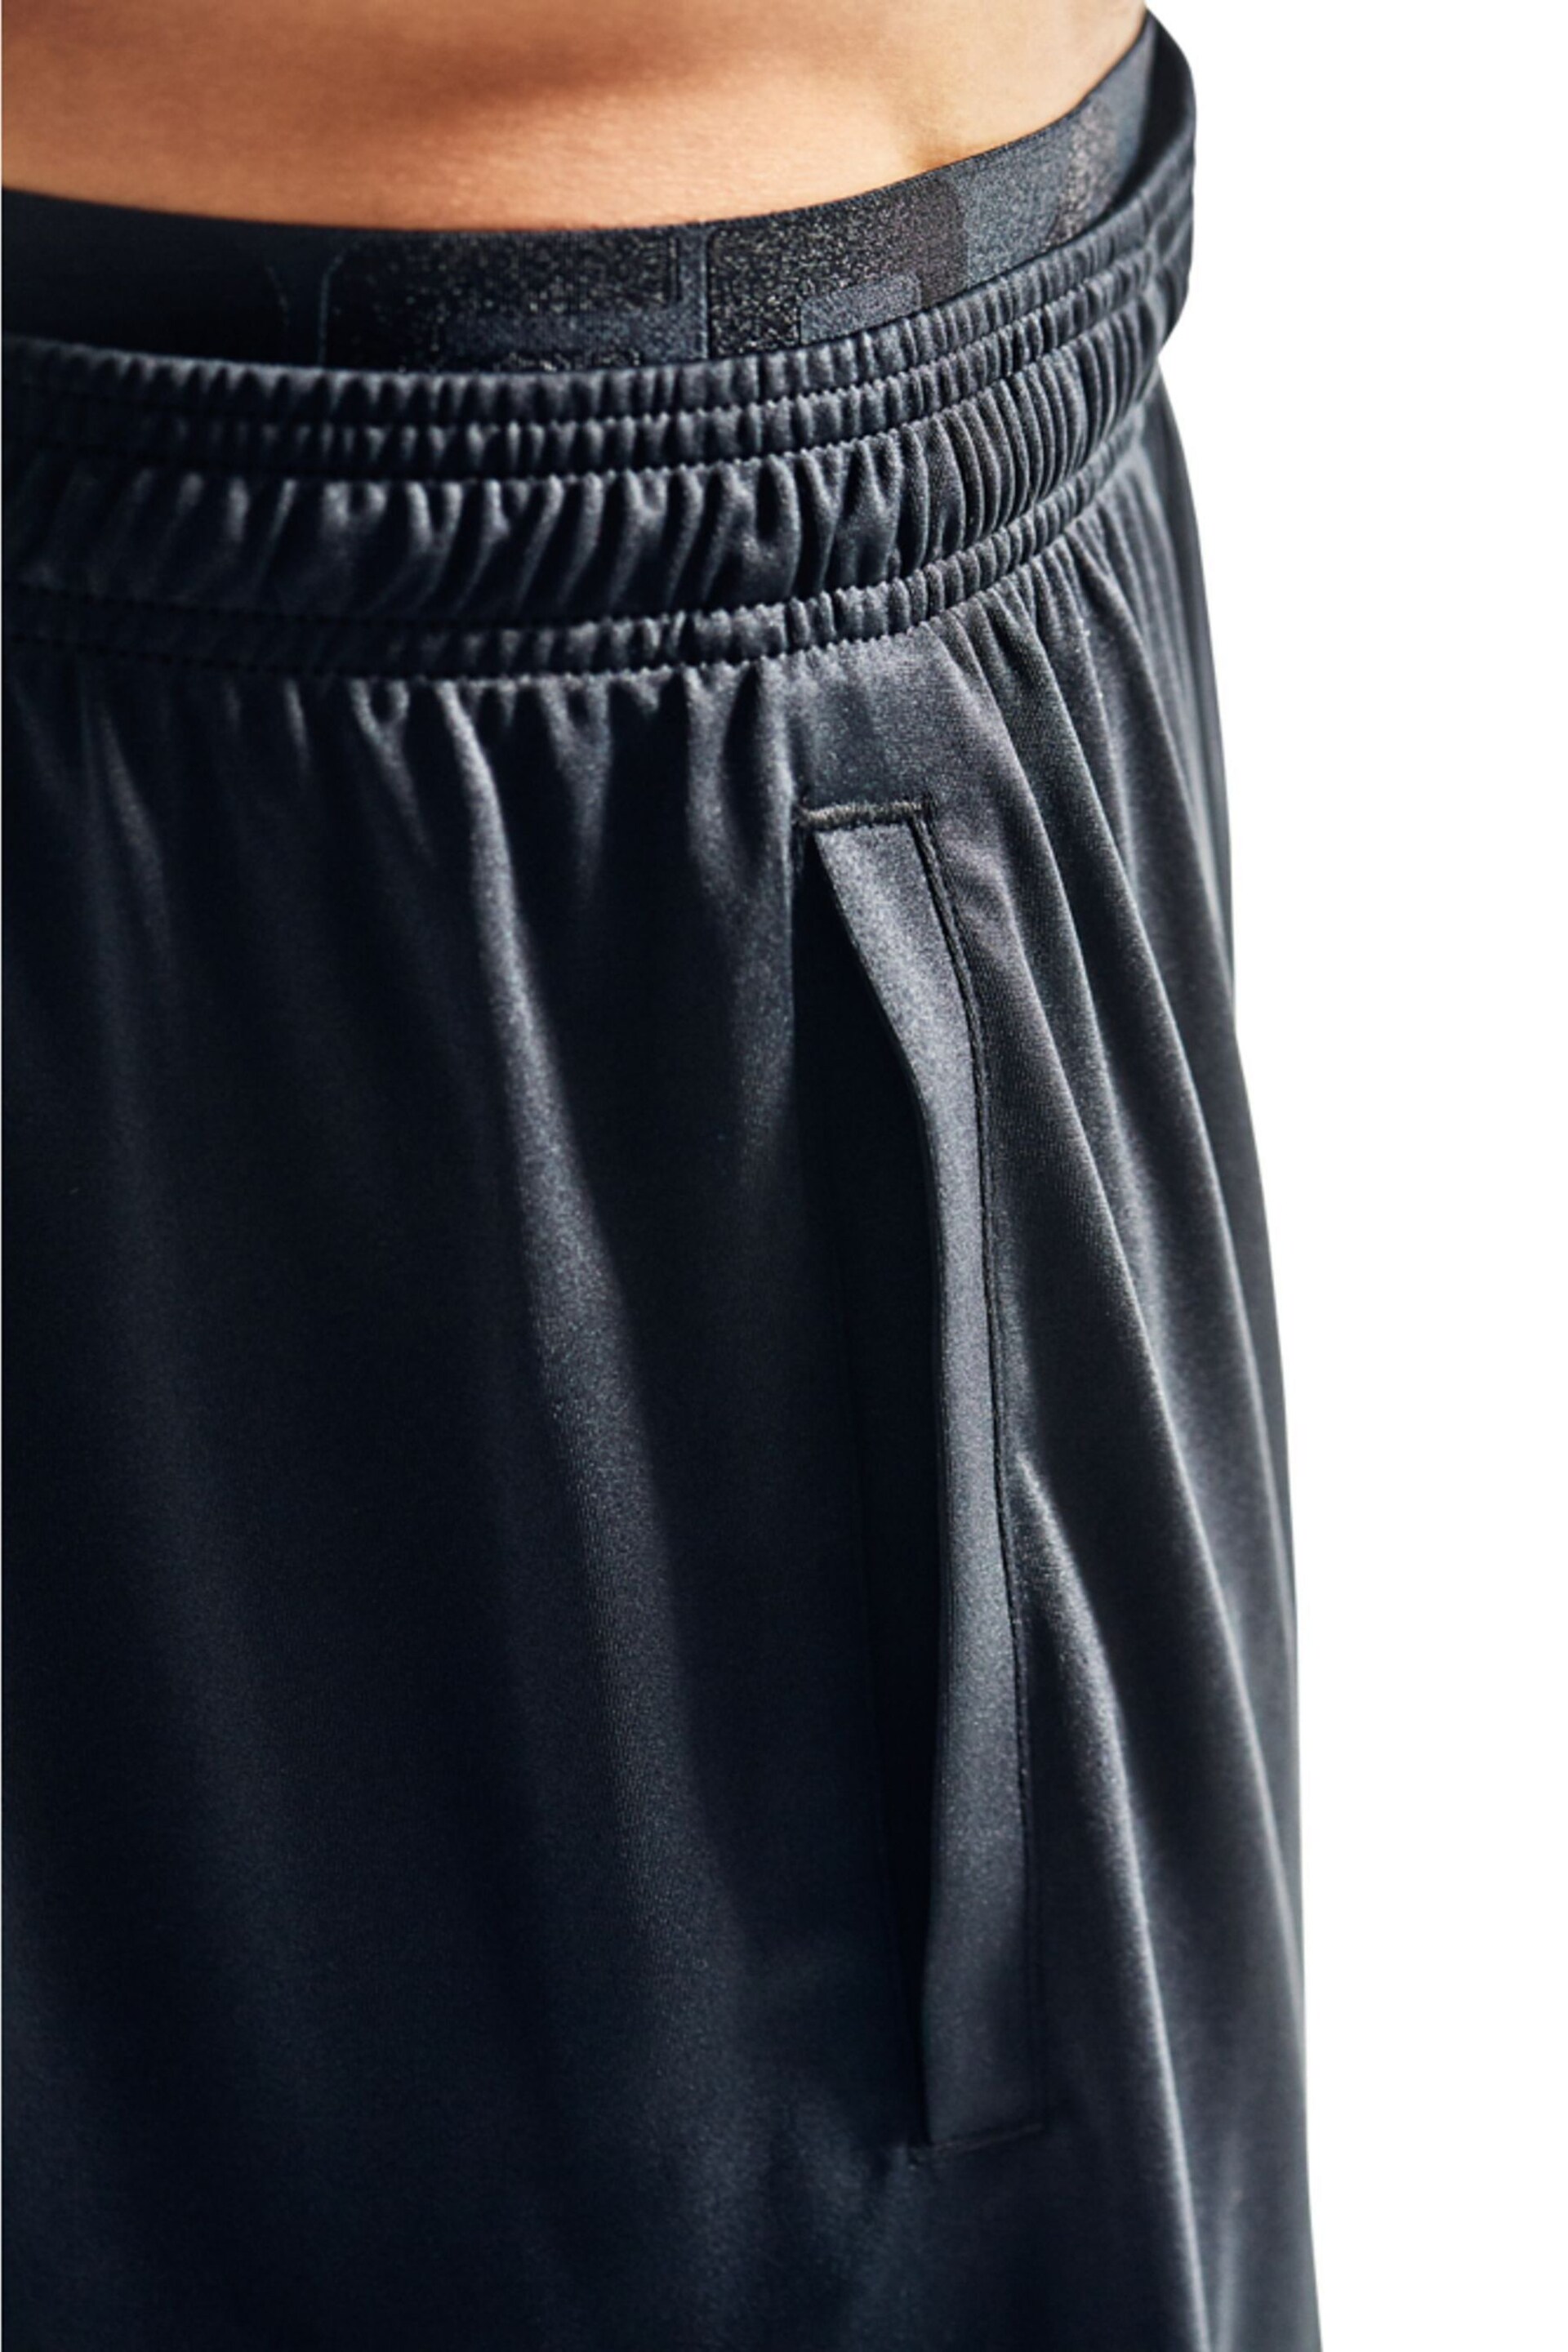 Under Armour Black Tech Graphic Shorts - Image 6 of 6